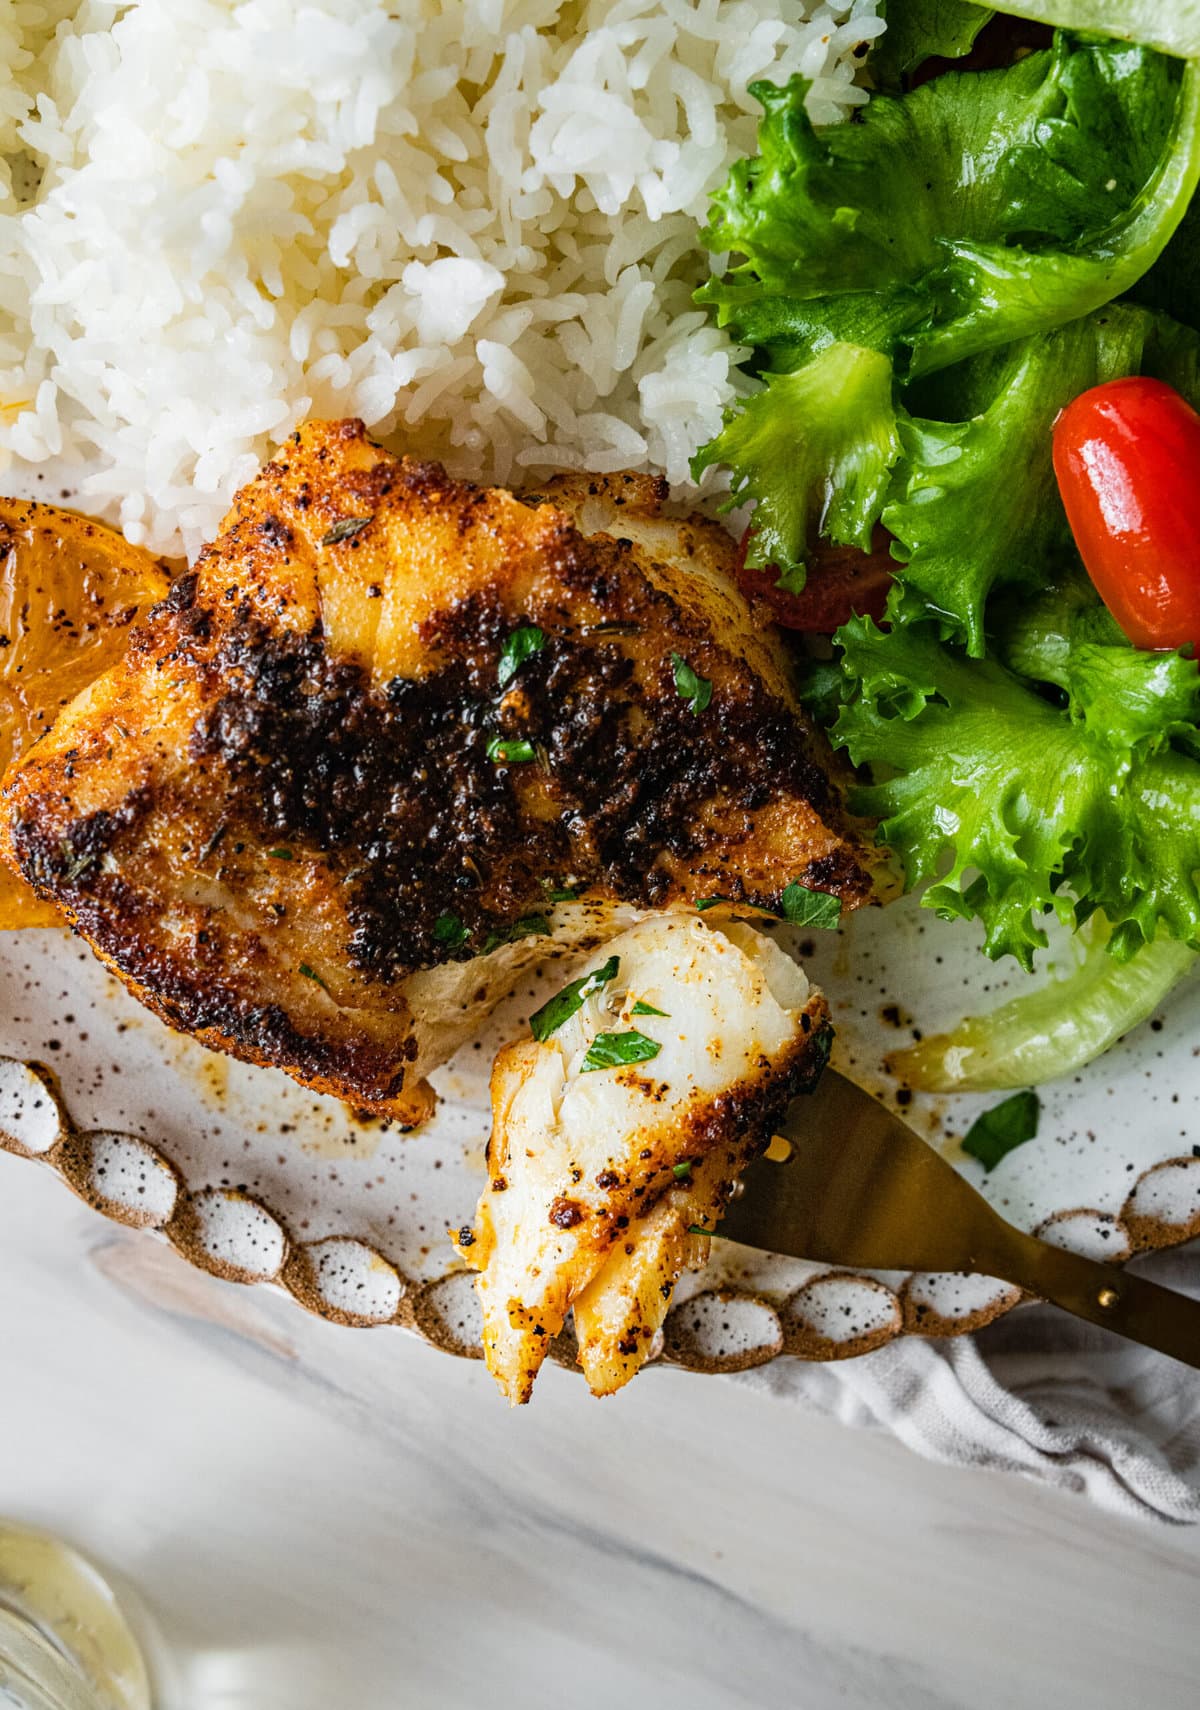 platted blackened cod with white rice and green salad with tomatoes. Bite of flaky fish on fork.